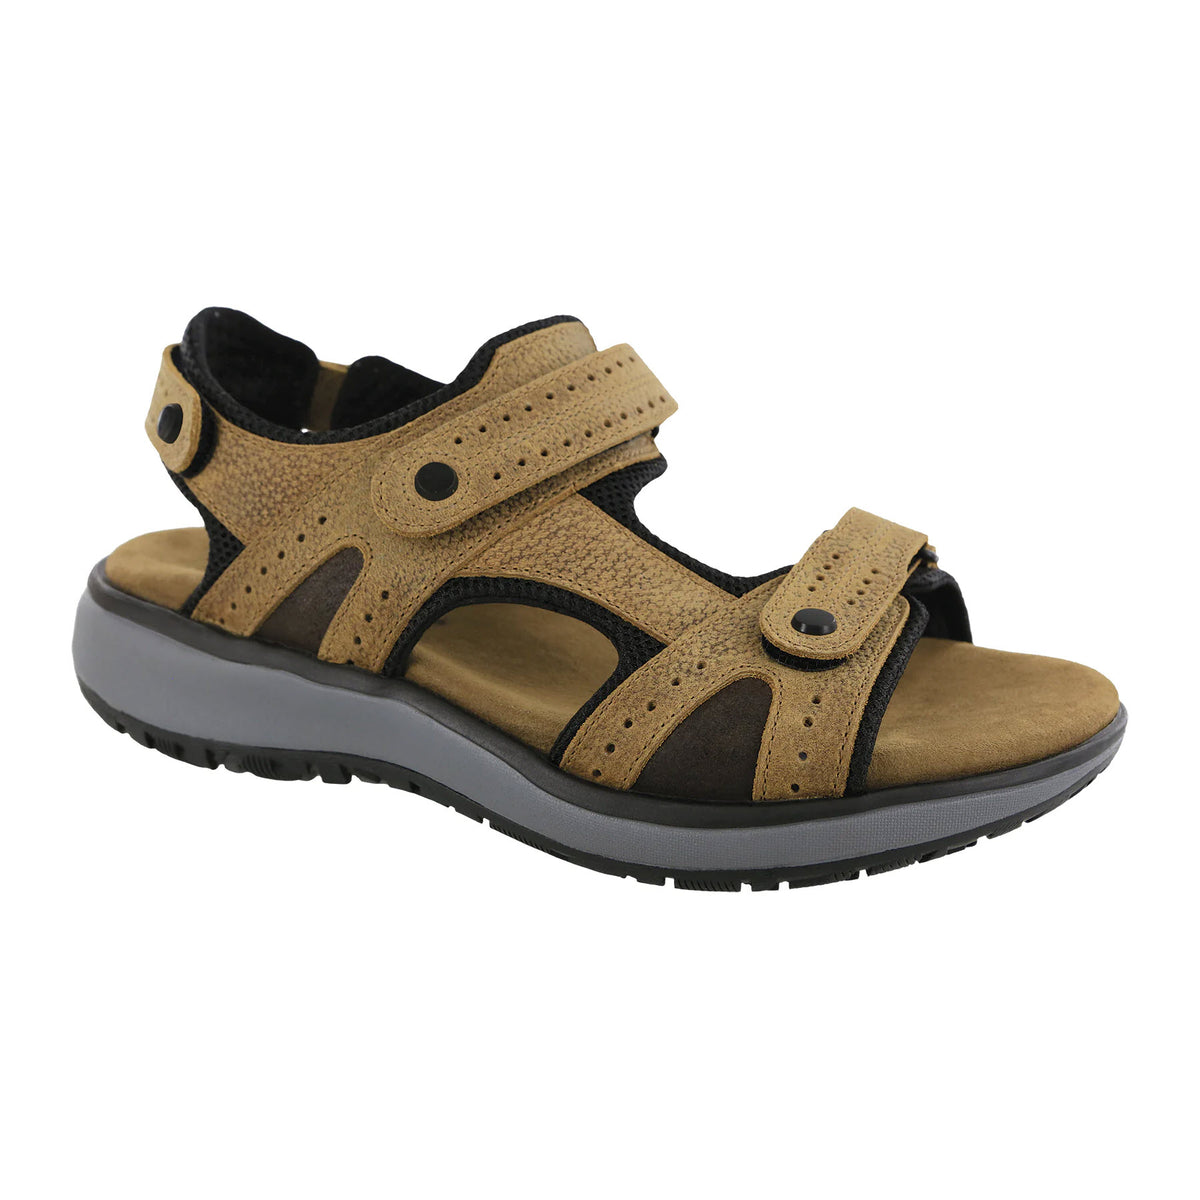 Brown SAS MAVERICK SANDAL STAMPEDE SAND - MENS with black accents, adjustable velcro straps, a sturdy gray sole, and a cushioned insole.